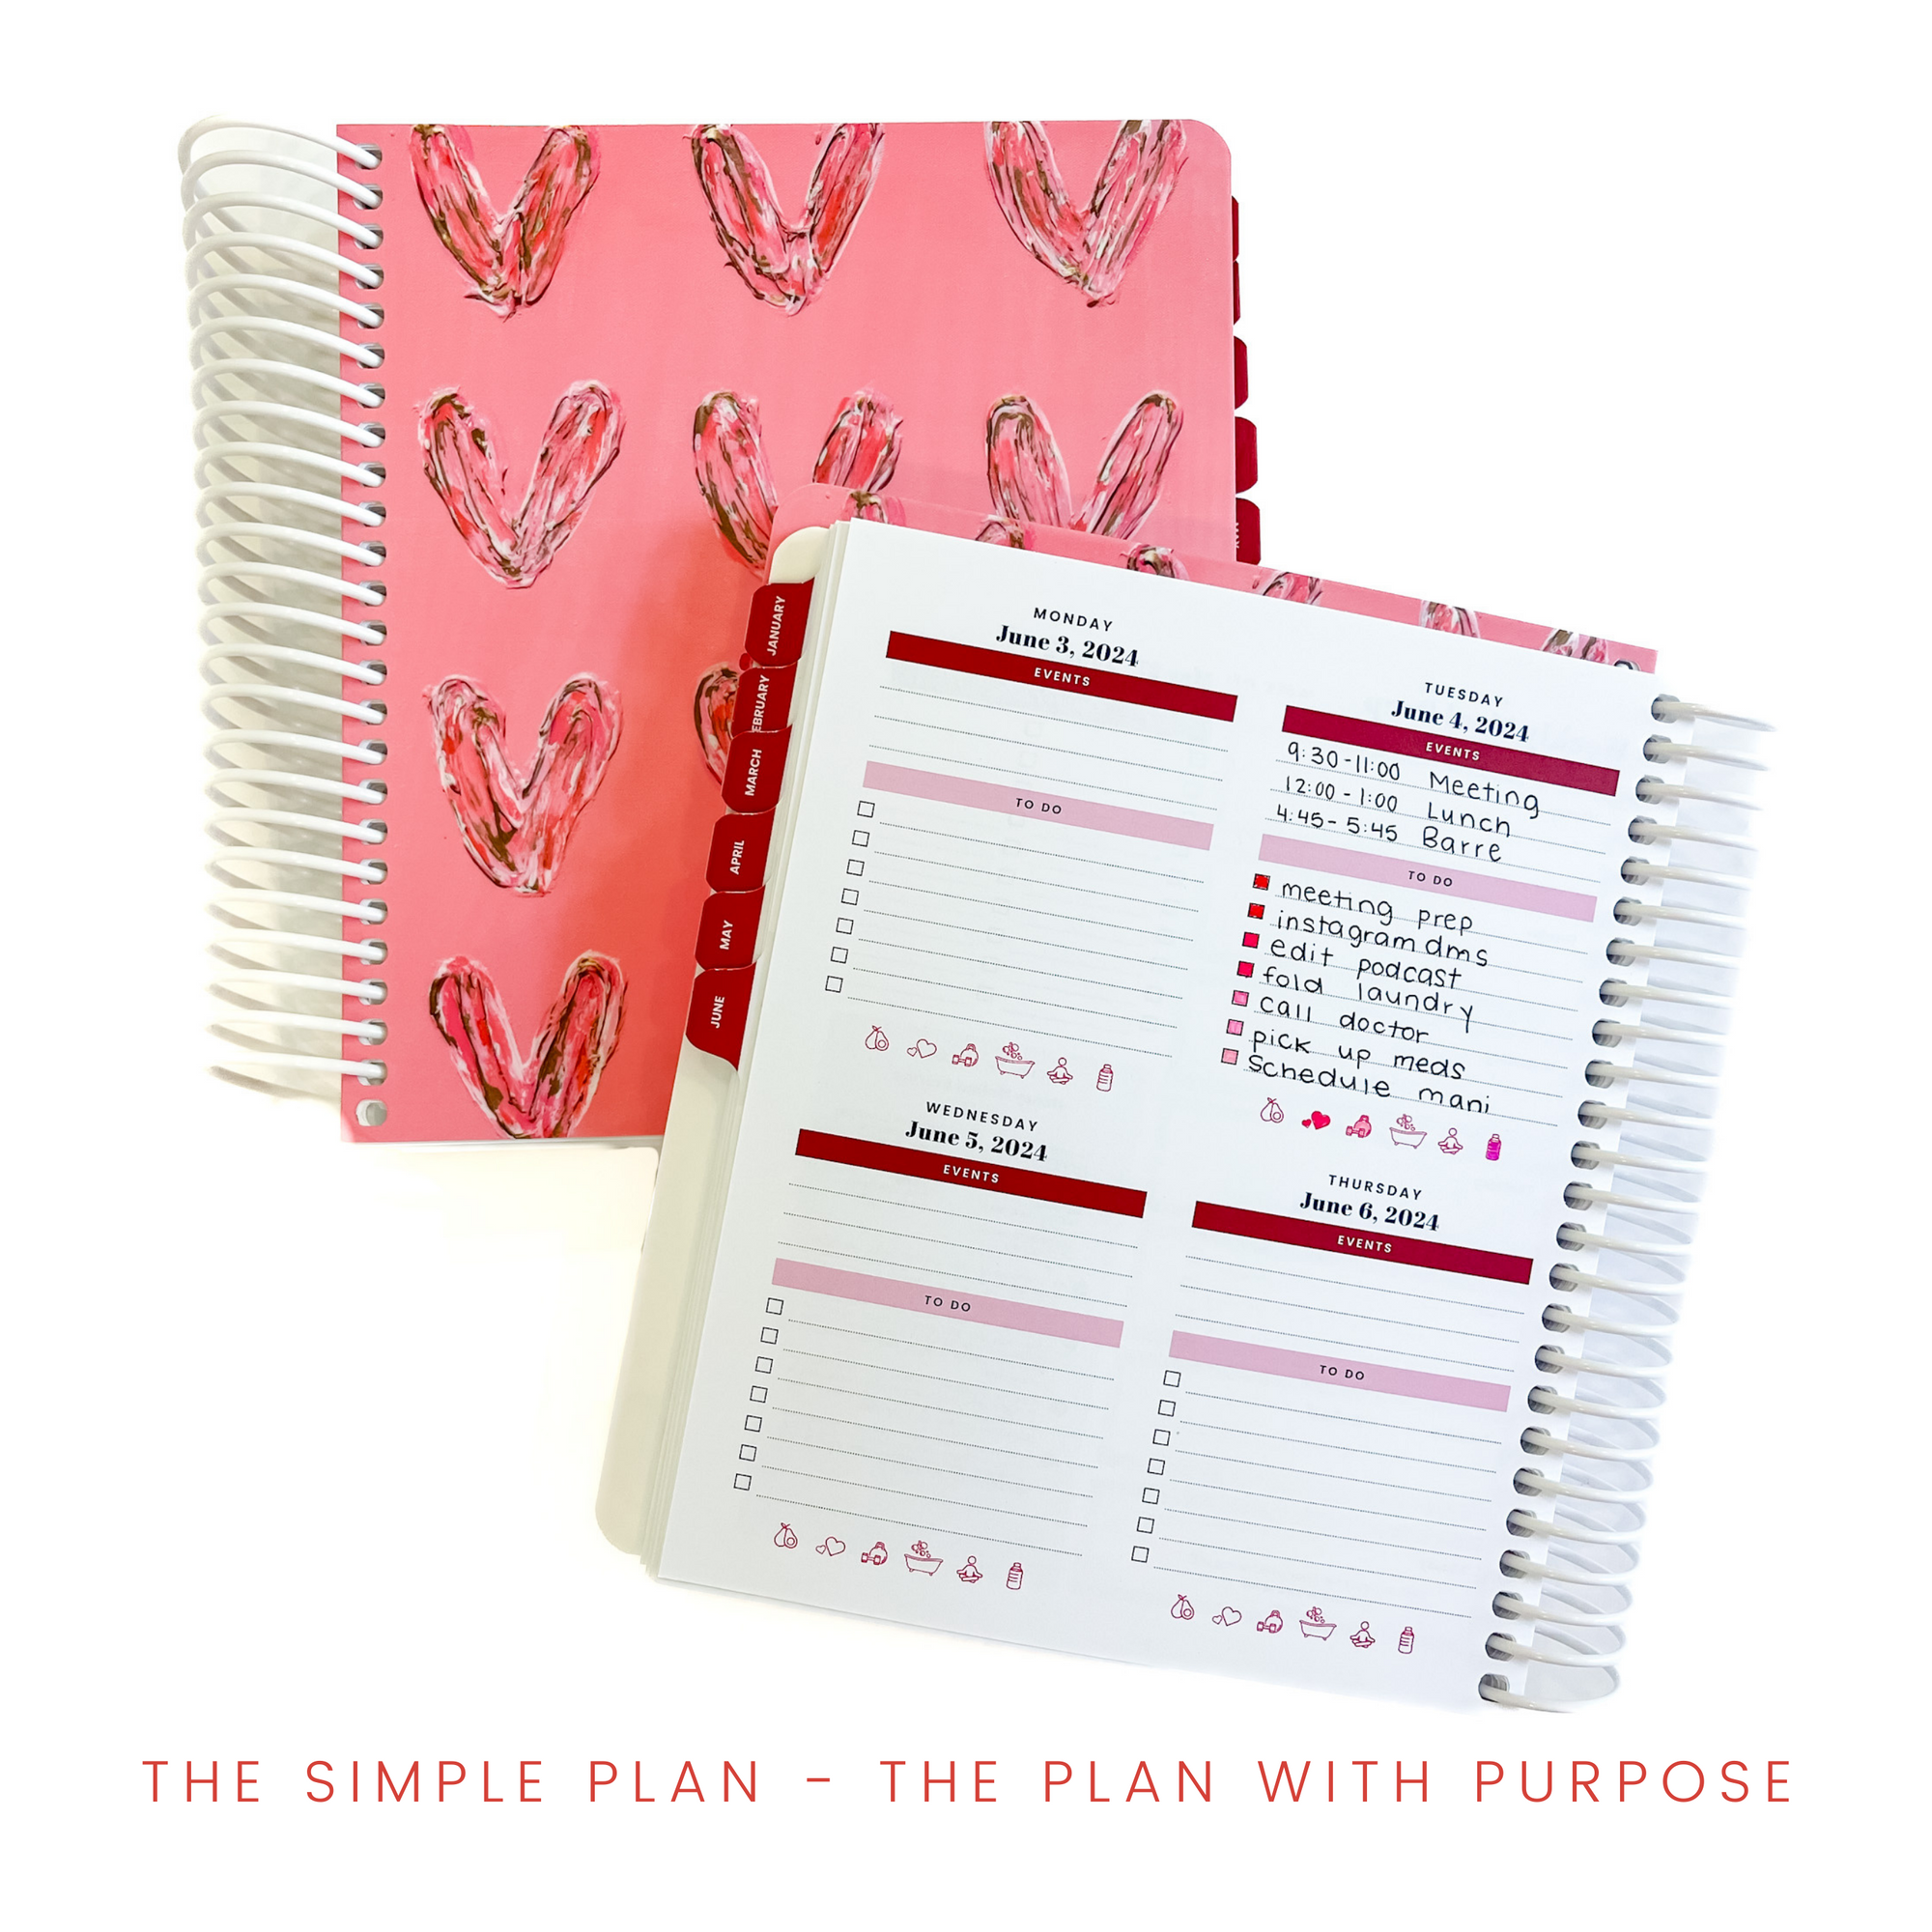 The Simple Plan | The Plan With Purpose